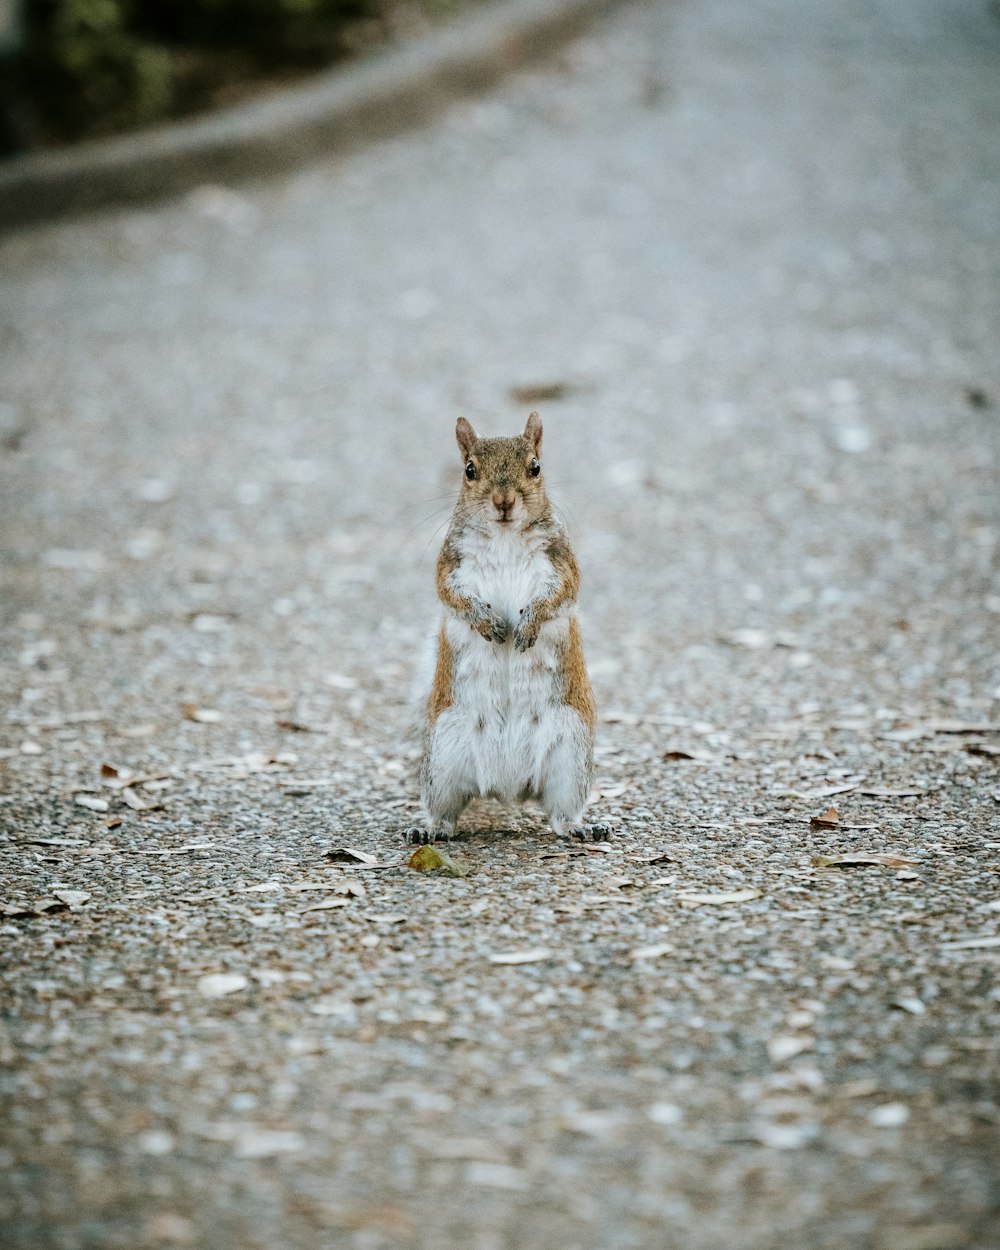 a squirrel sitting on its hind legs on a road